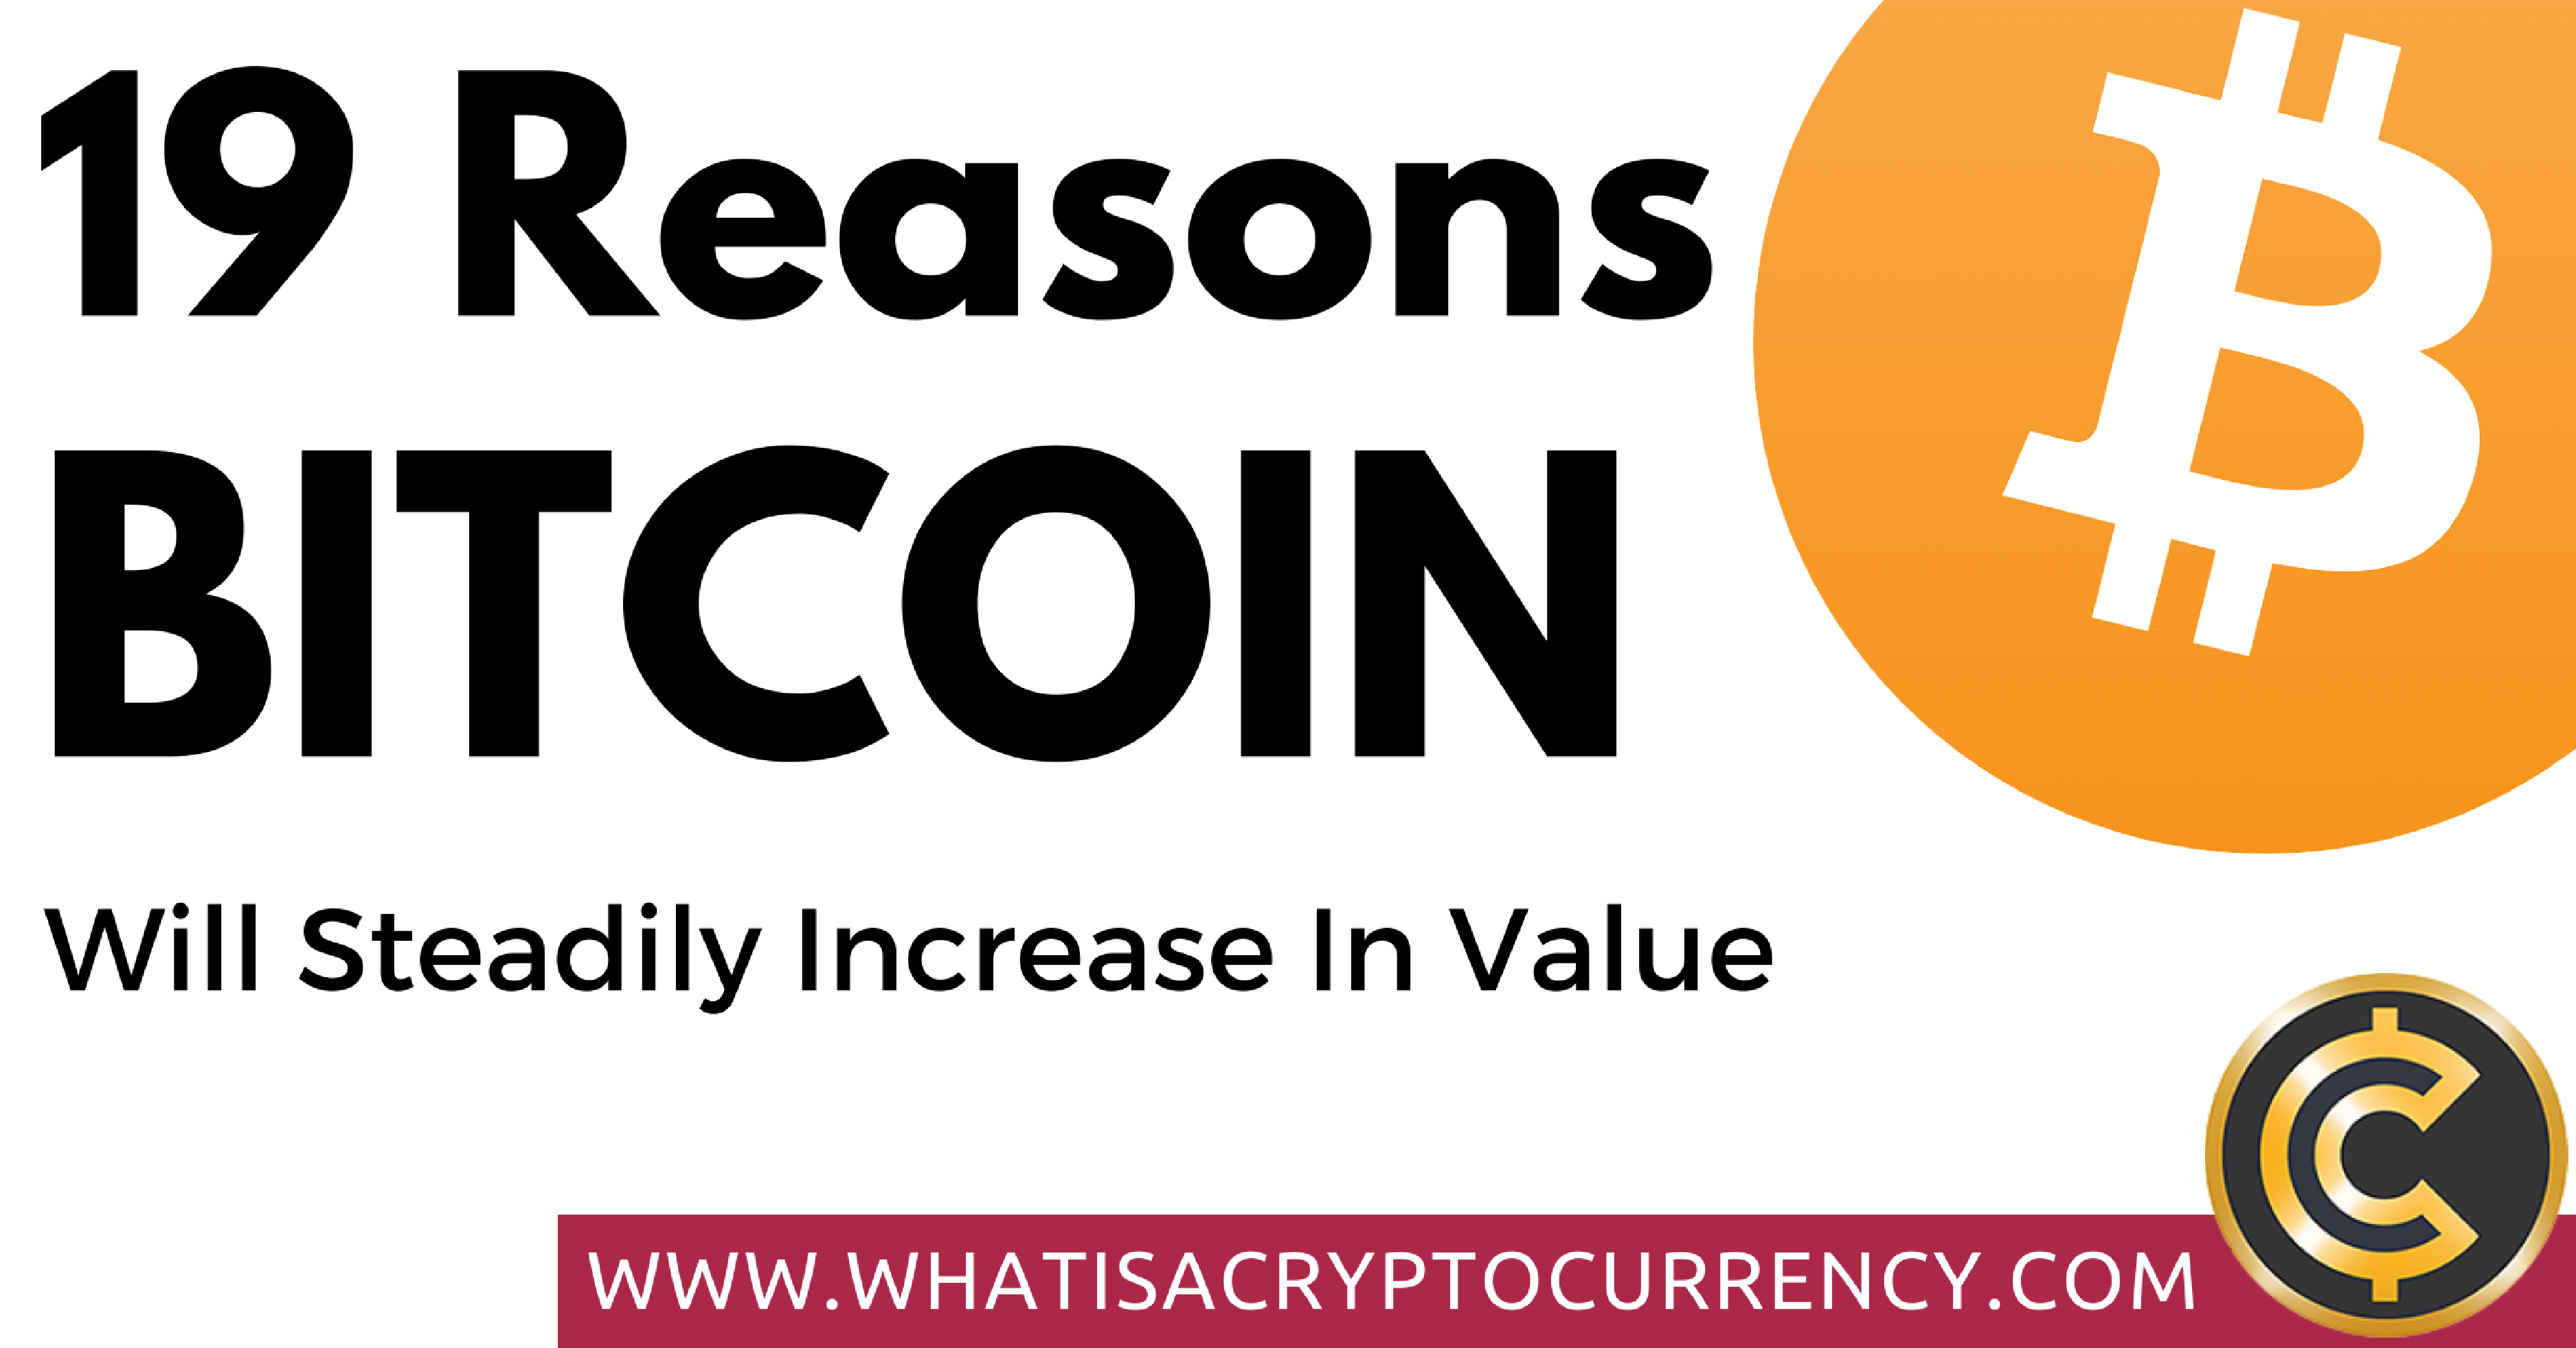 19 Reasons Why The Price of Bitcoin Will Steadily Increase